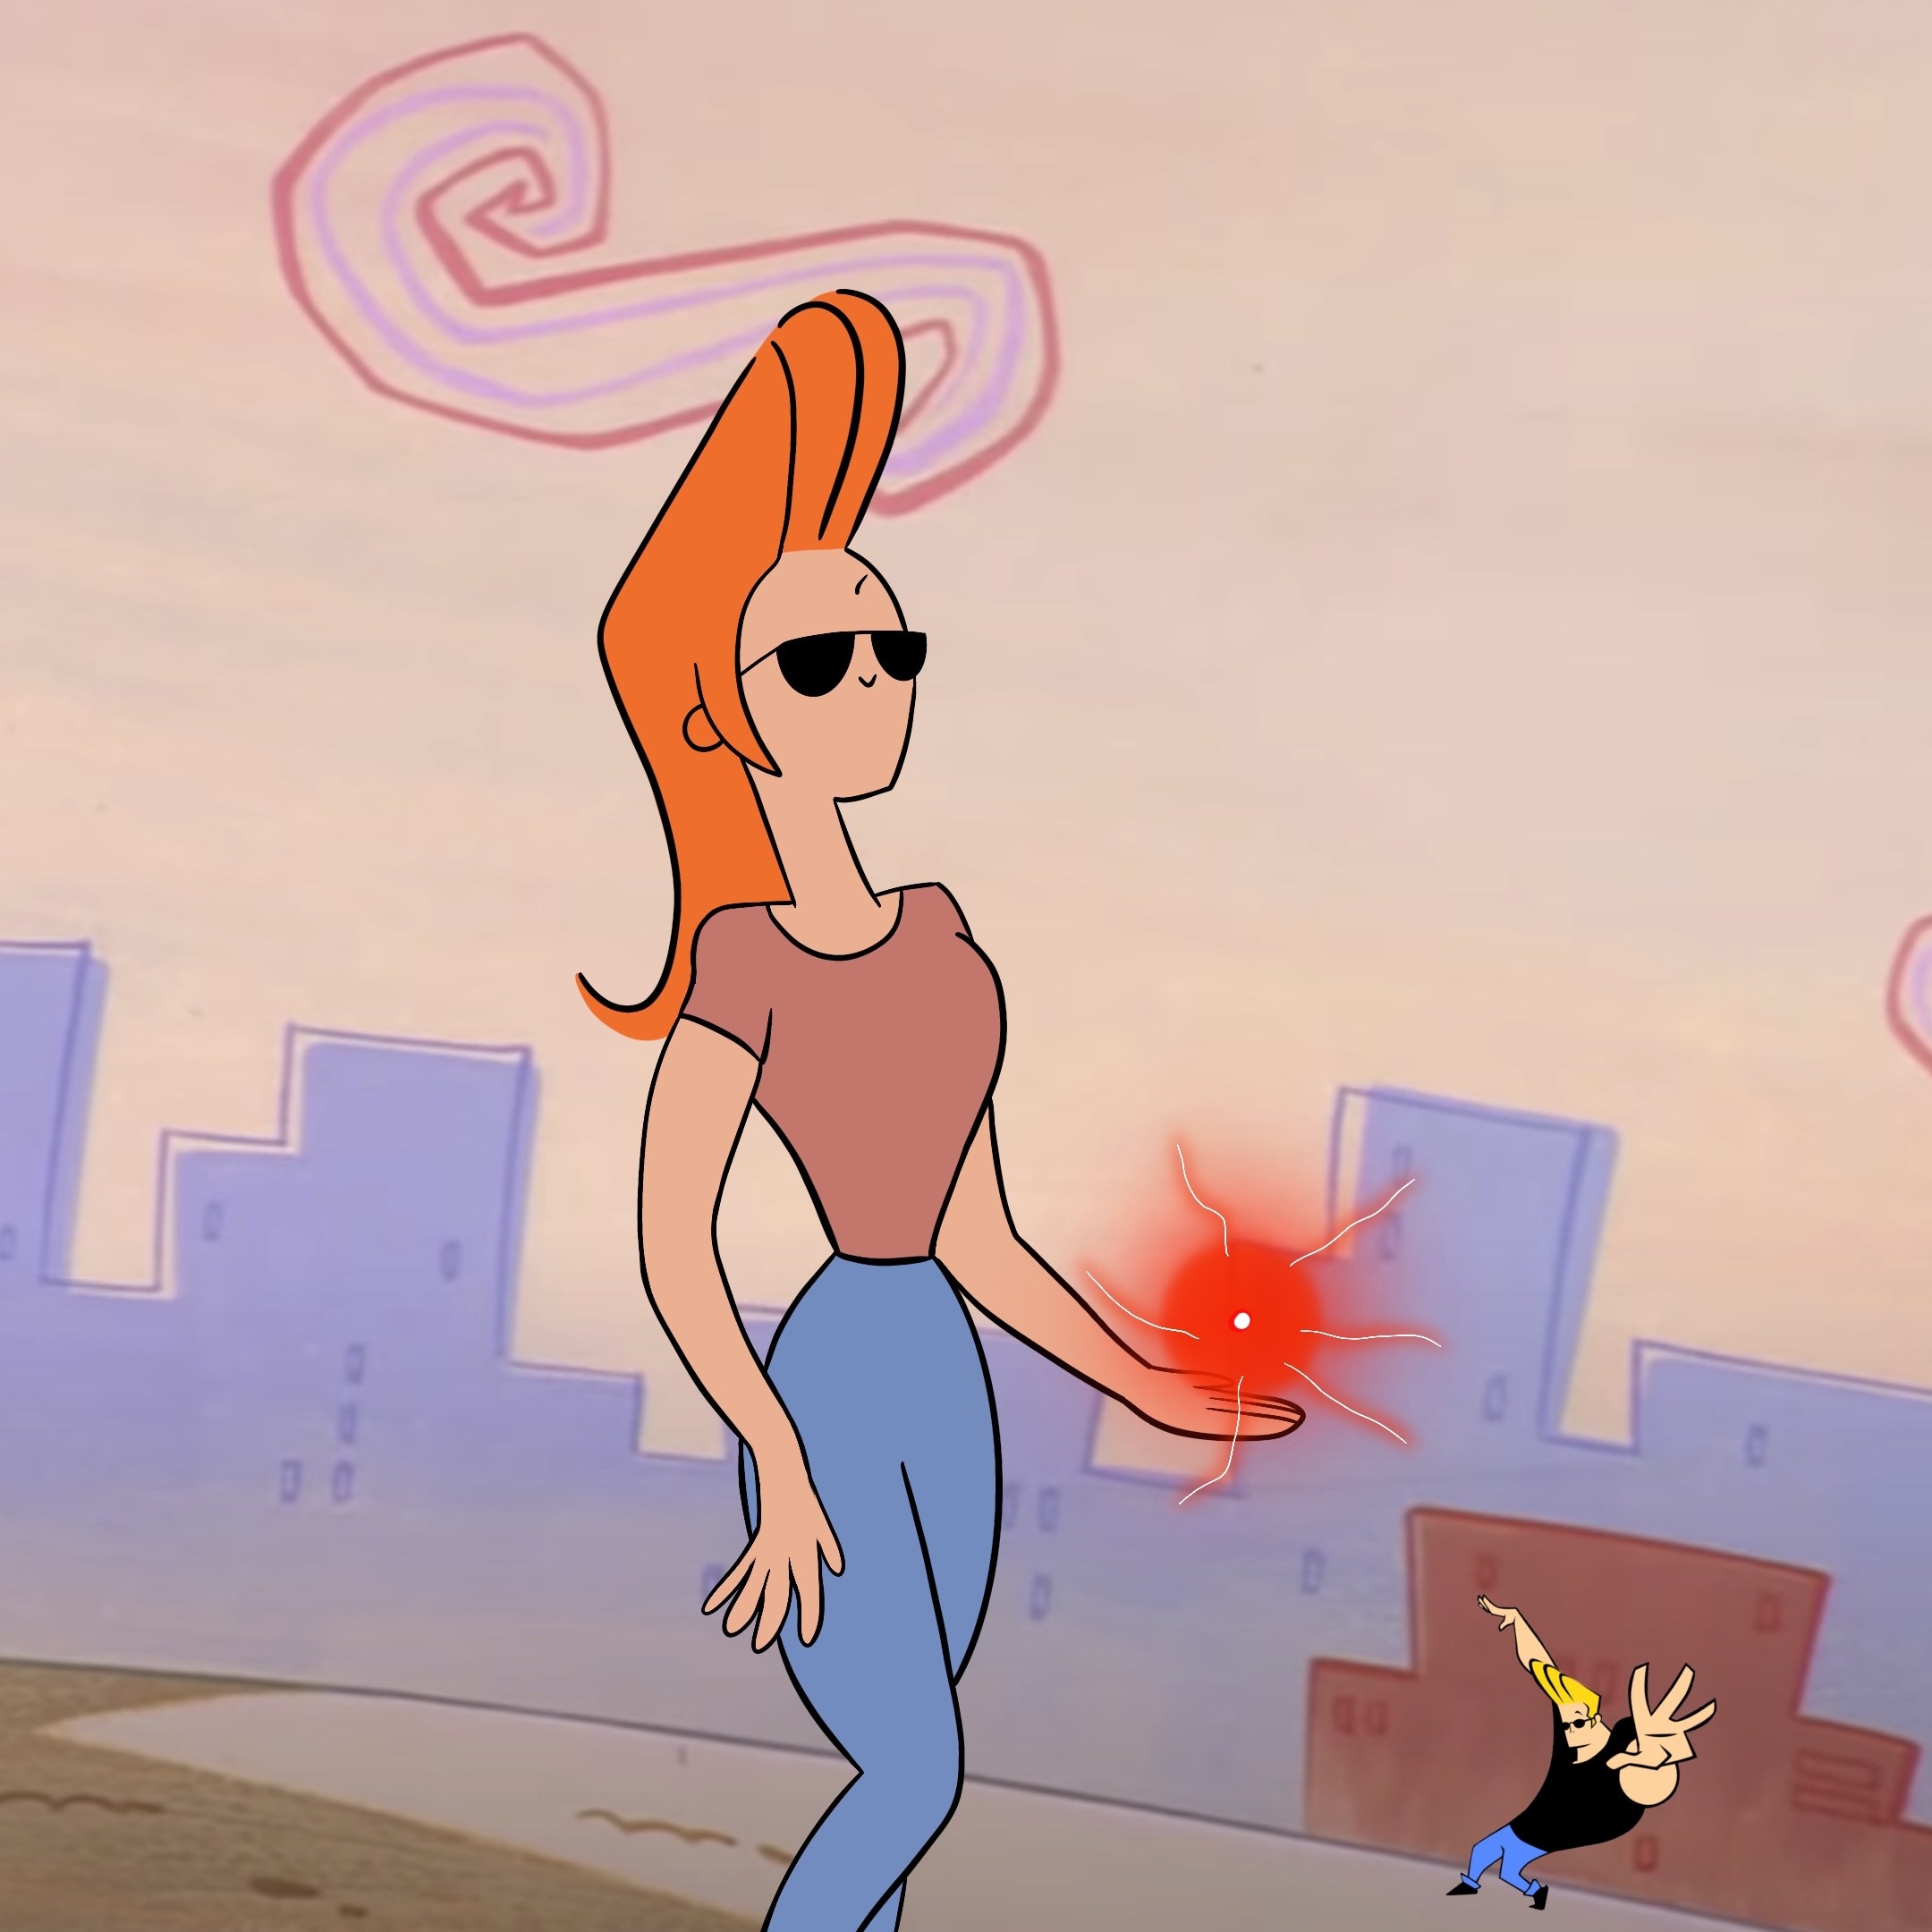 Wanda walks down the street with Johnny Bravo in the distance